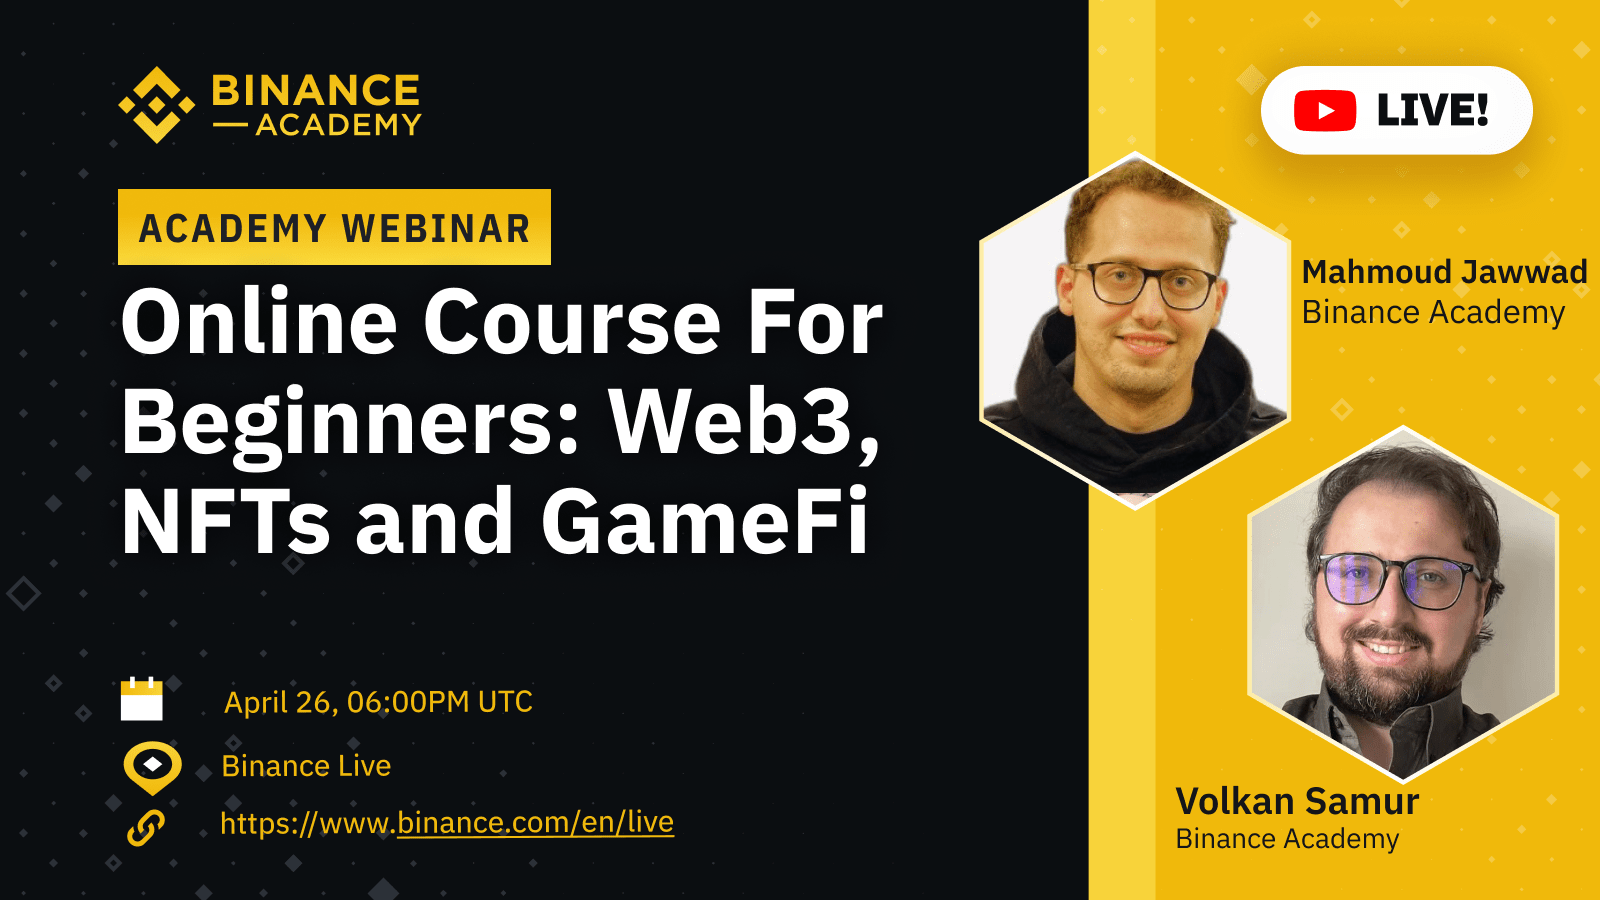 Online Course For Beginners: Web3, NFTs and GameFi